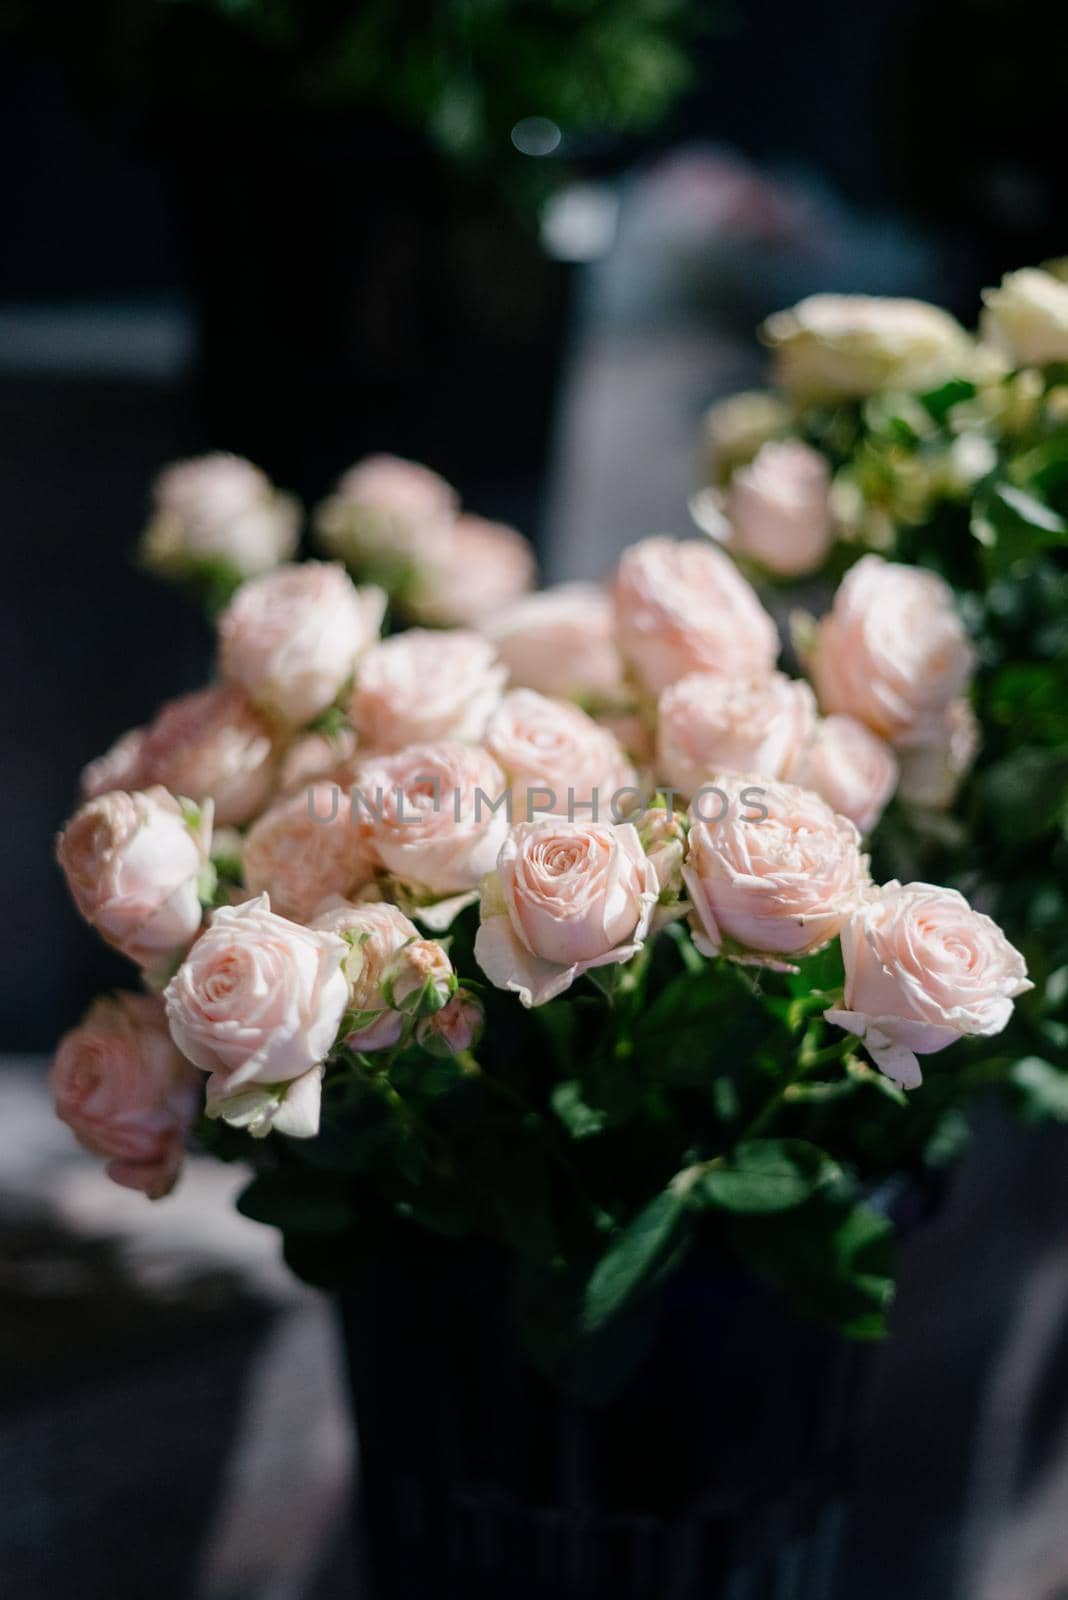 White roses in a flower shop.Beautiful flowers for a catalog, online store. Flower business. Concept flower store and delivery.